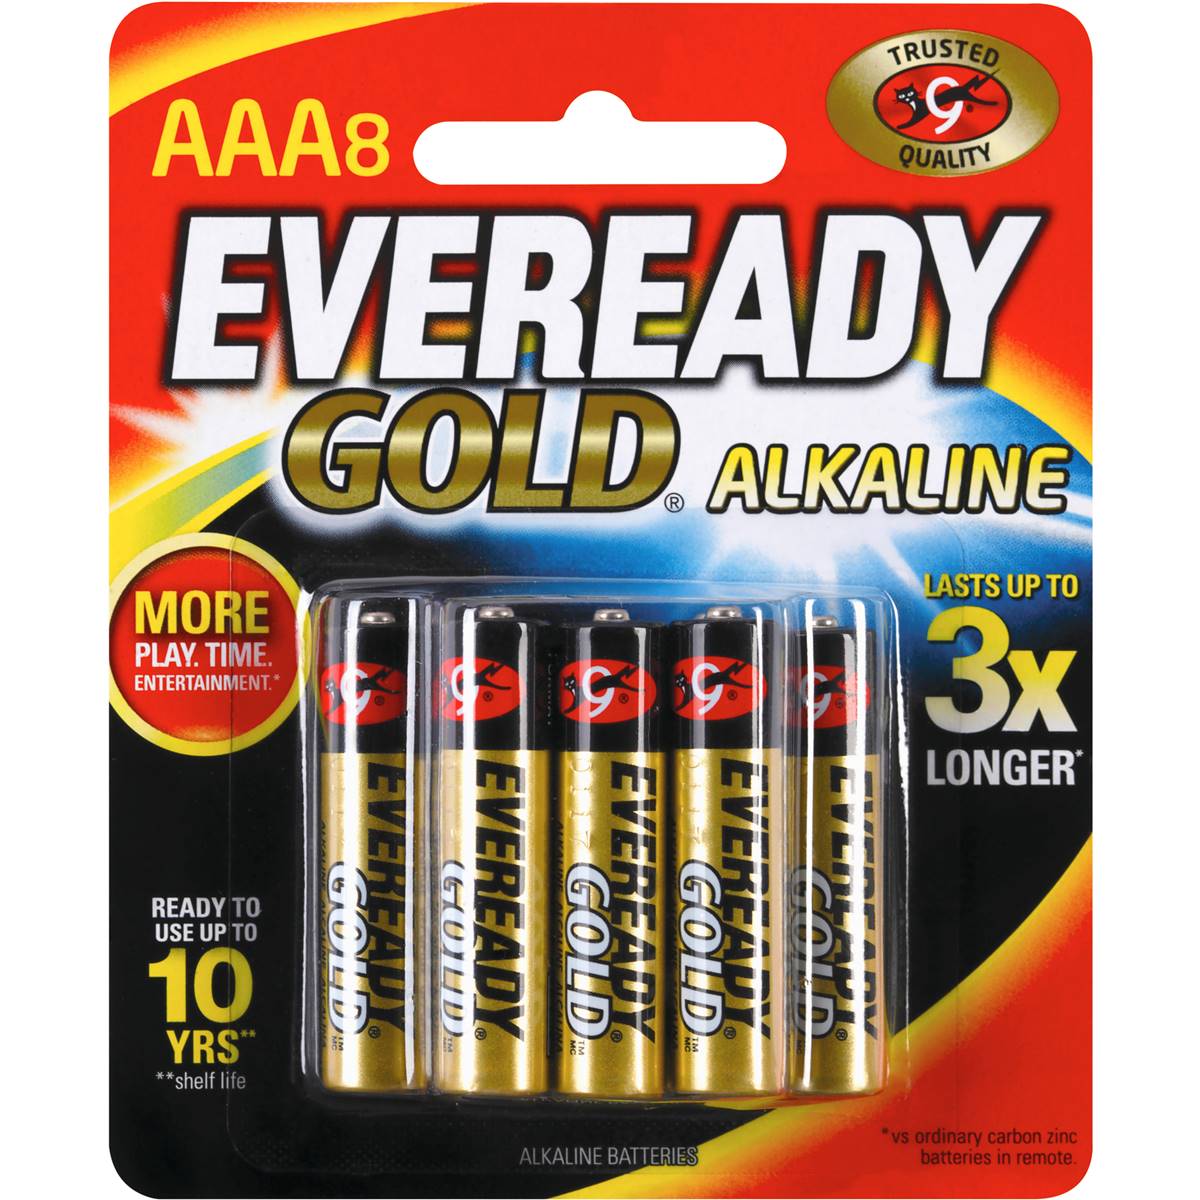 Eveready Gold AAA Batteries 8 Pack